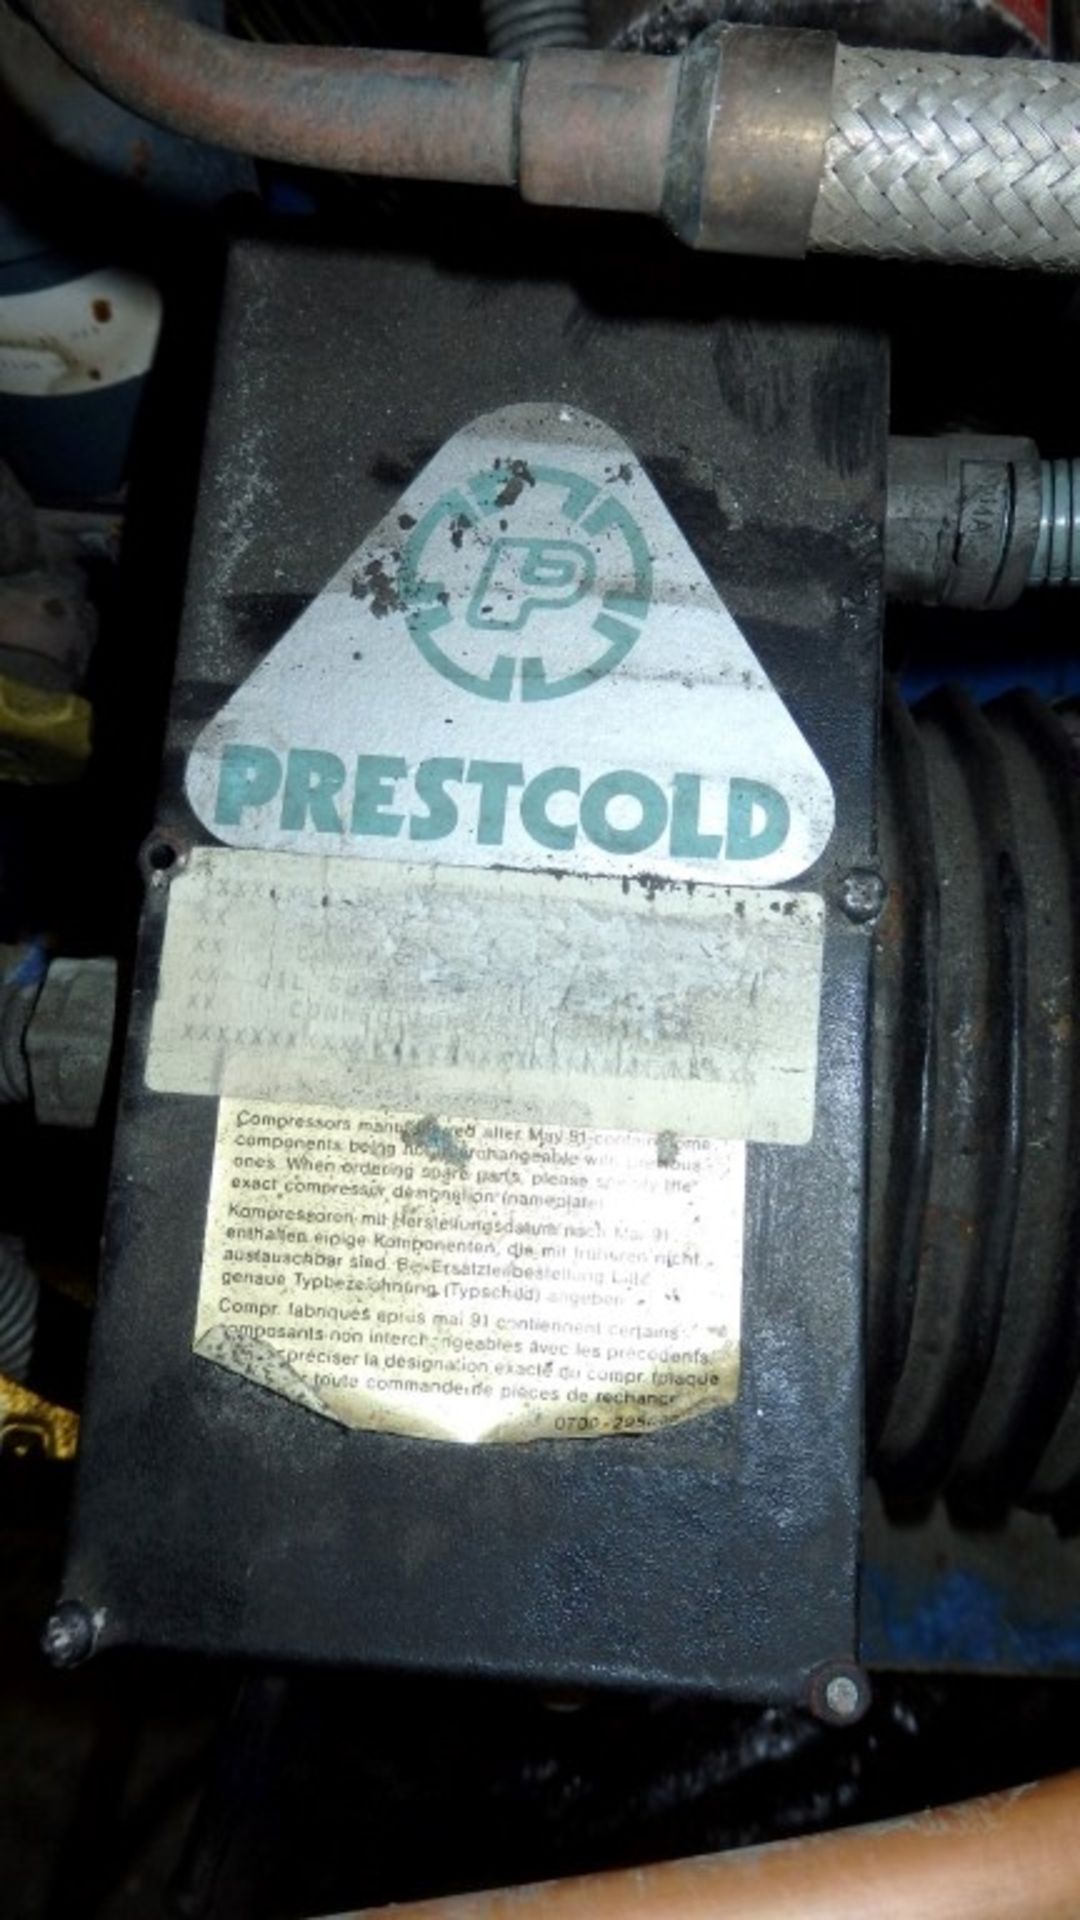 1 x Prestcold / Copeland Refrigeration Unit - Features Compressor & Fan Unit - Used, Sold As - Image 5 of 5